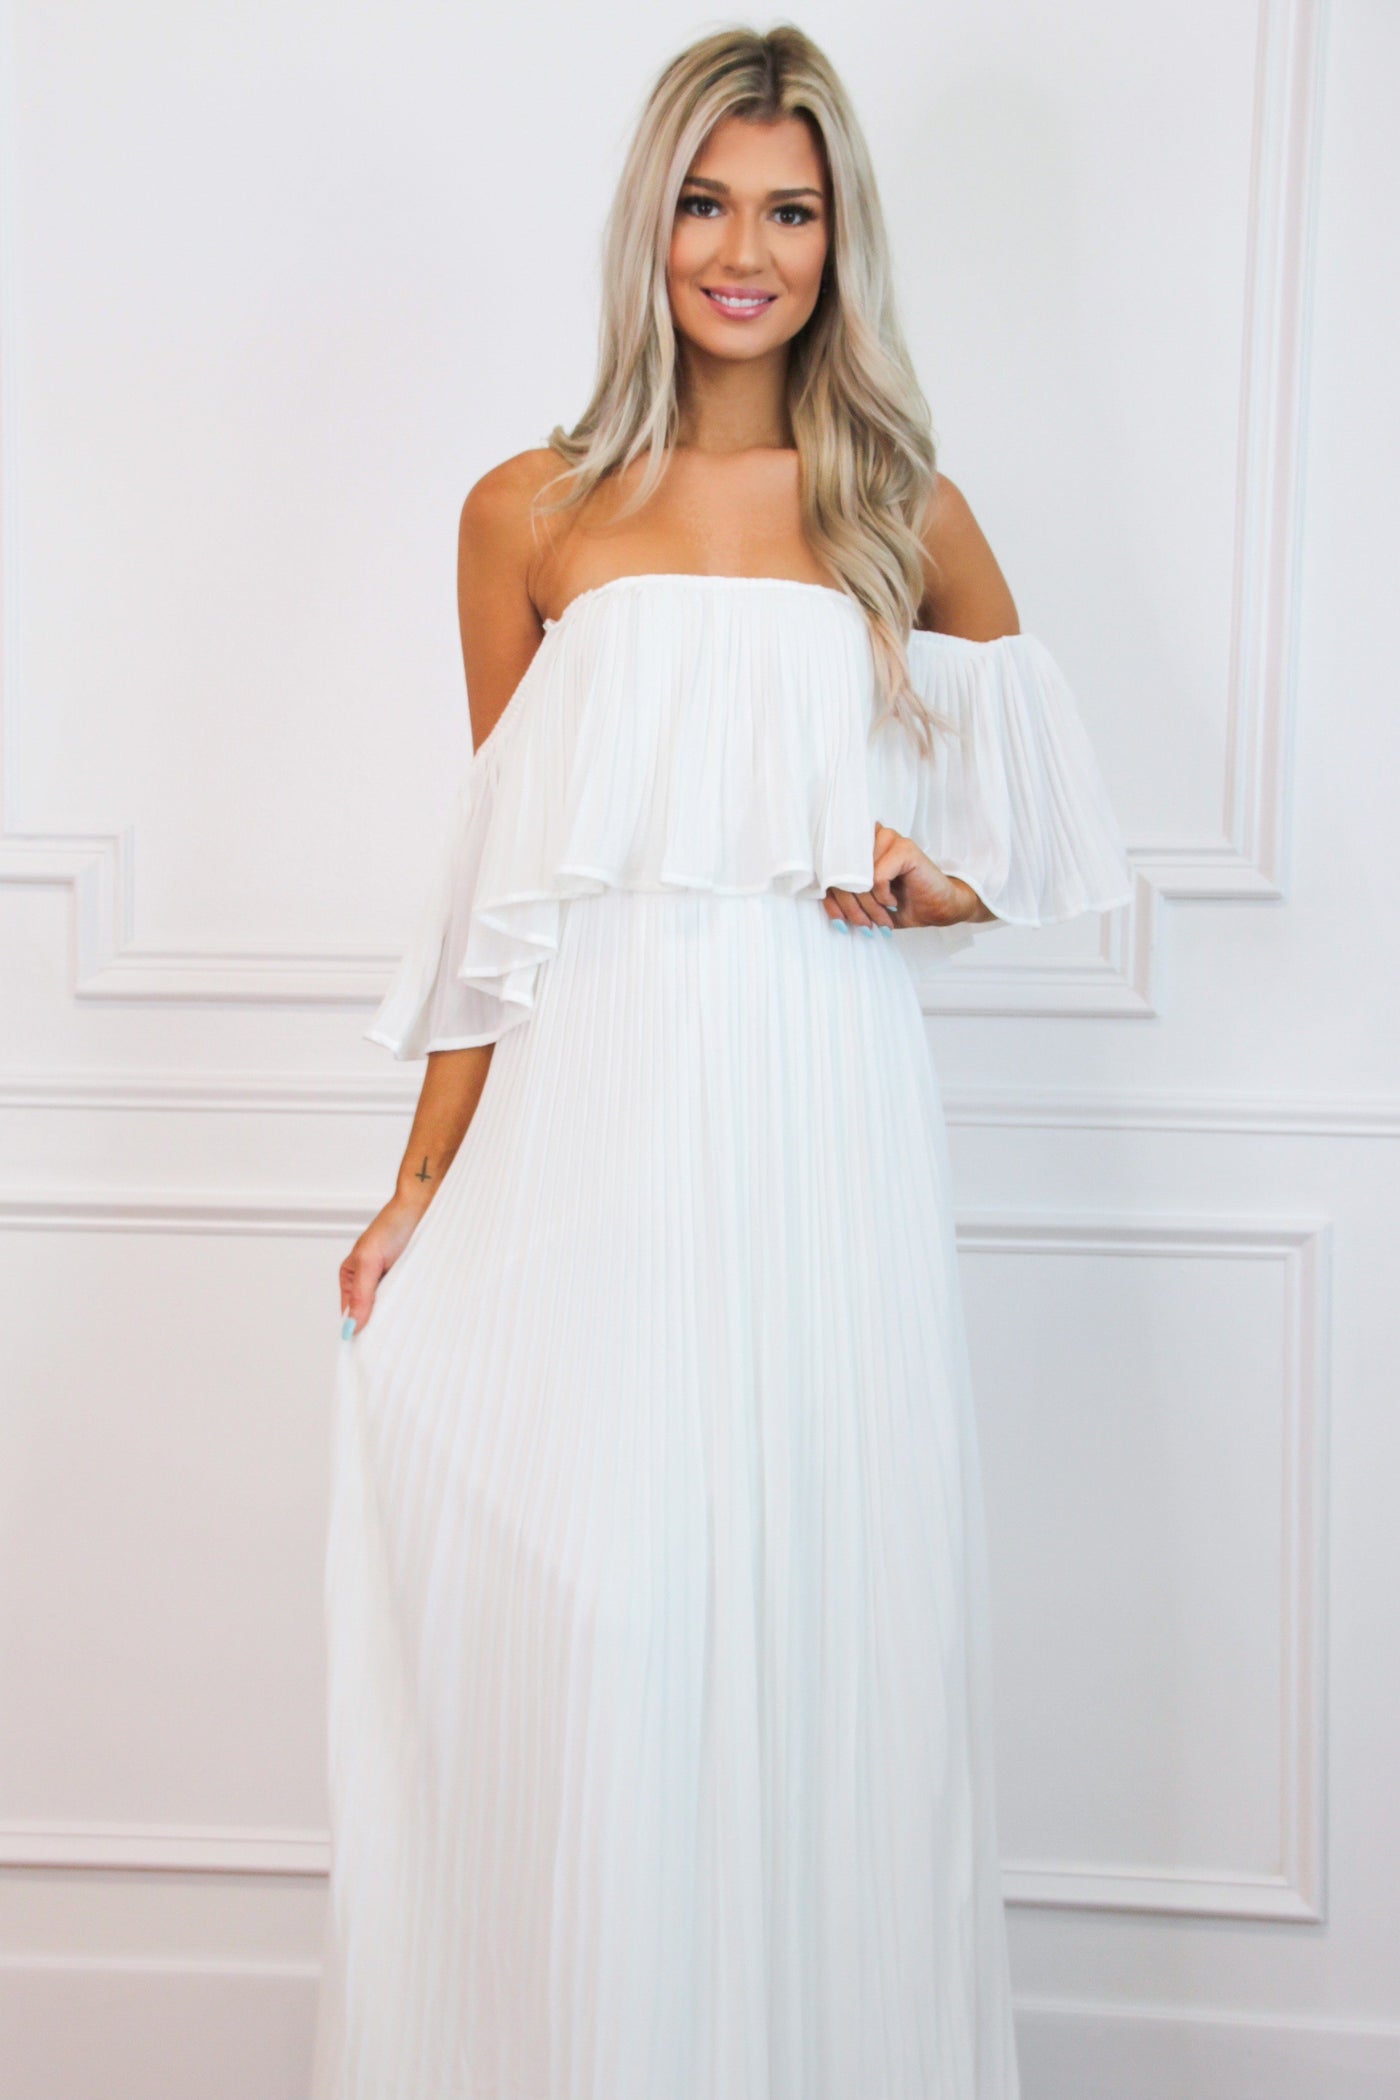 Say You Love Me Pleated Maxi Dress: White - Bella and Bloom Boutique